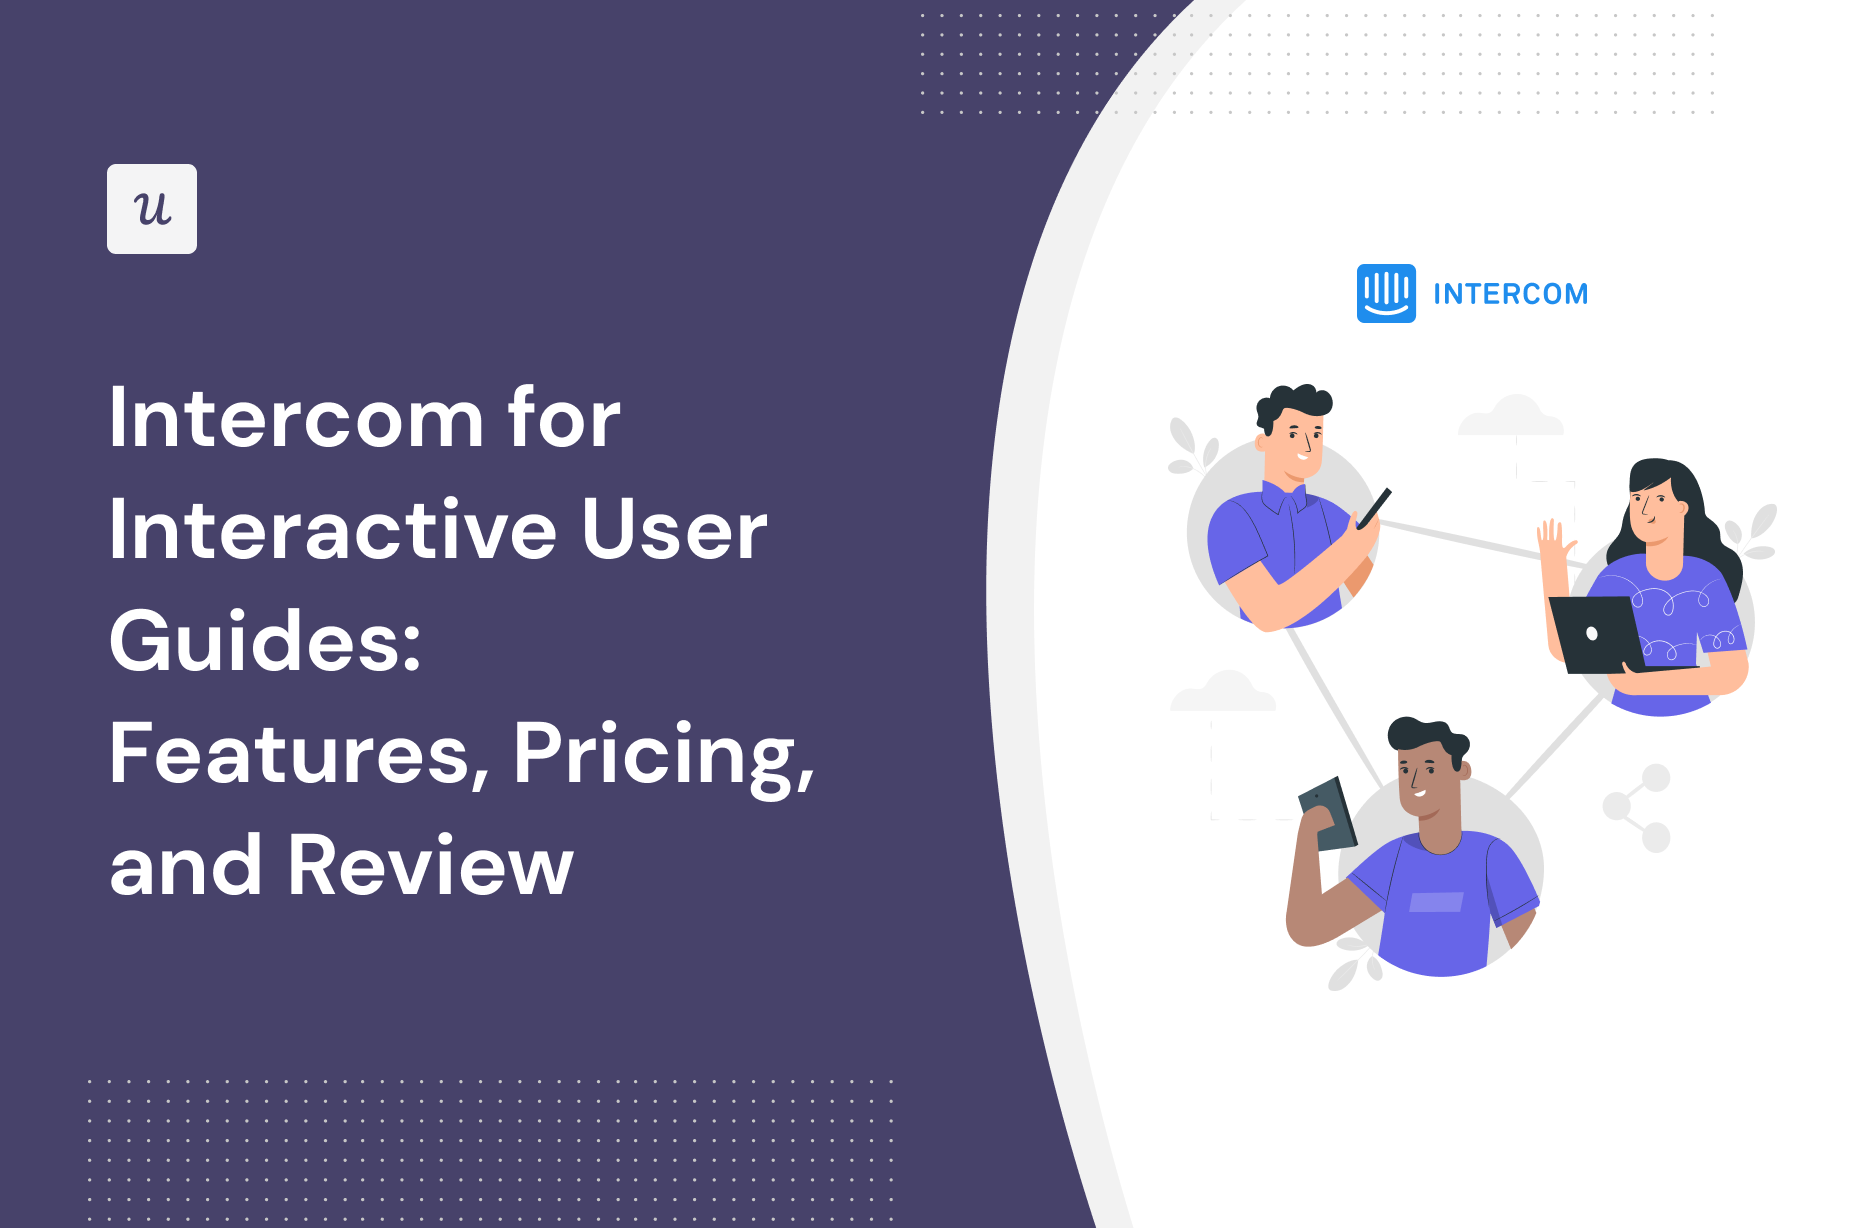 Intercom for Interactive User Guides: Features, Pricing, and Review